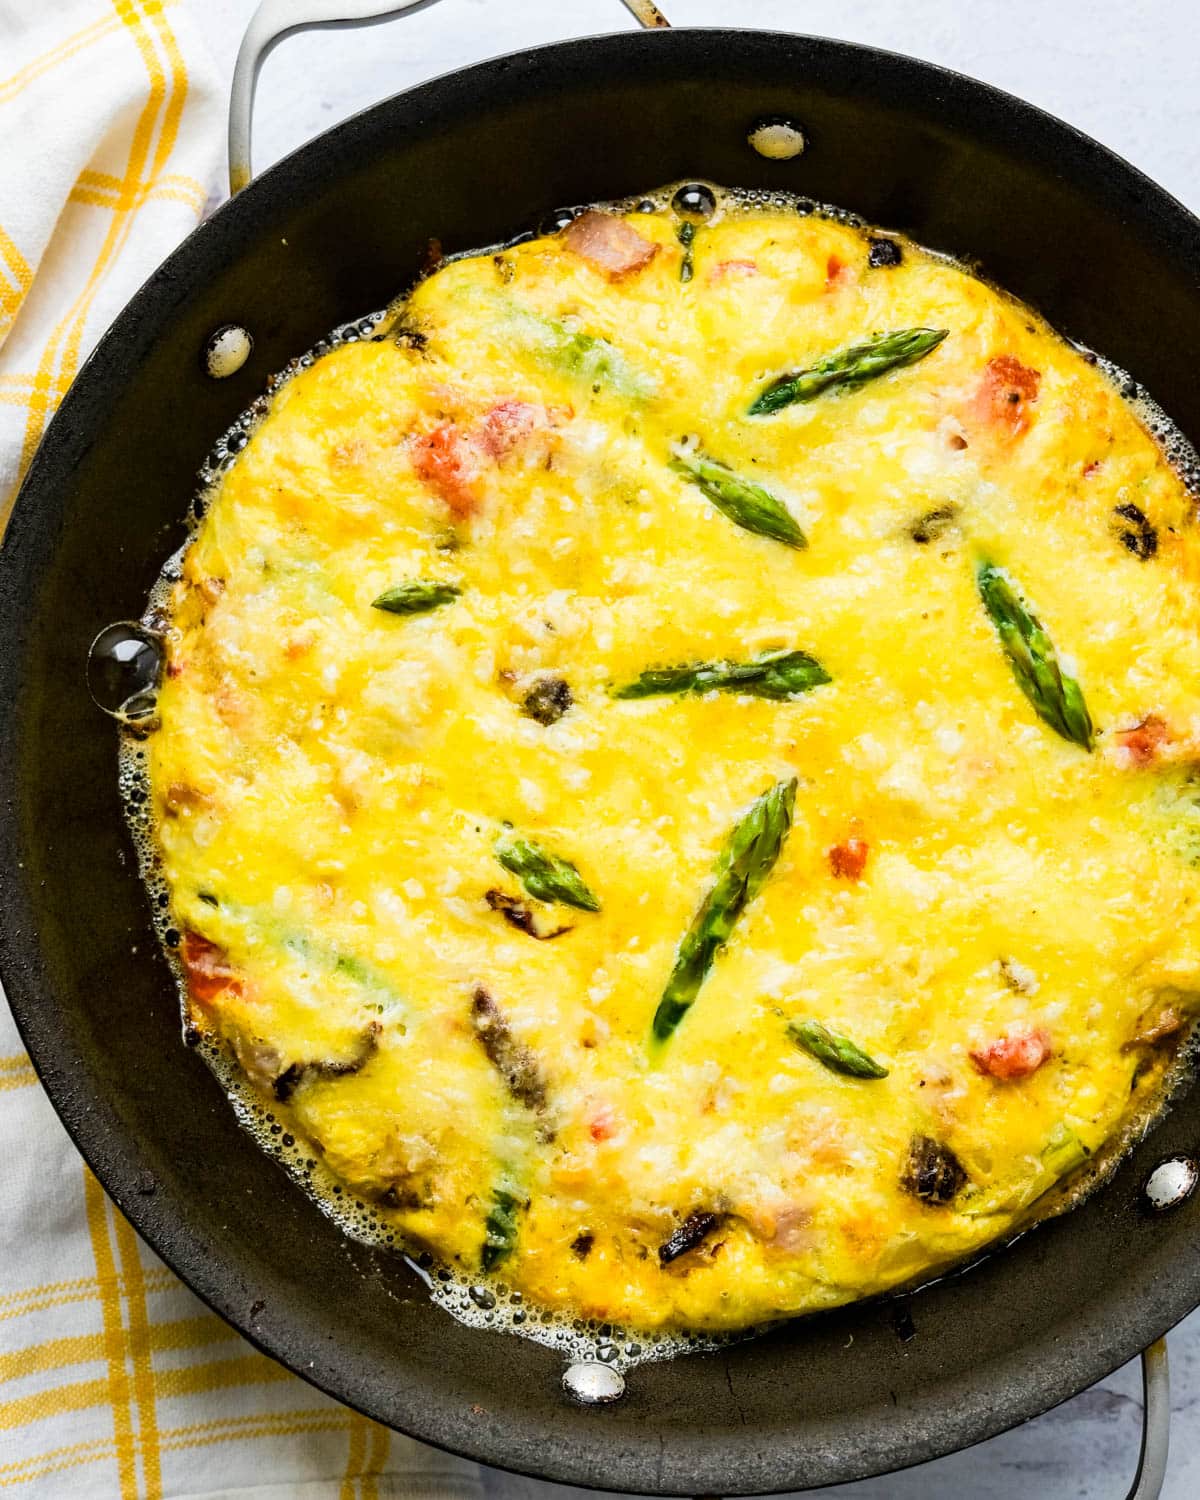 A baked puffy frittata in a skillet.